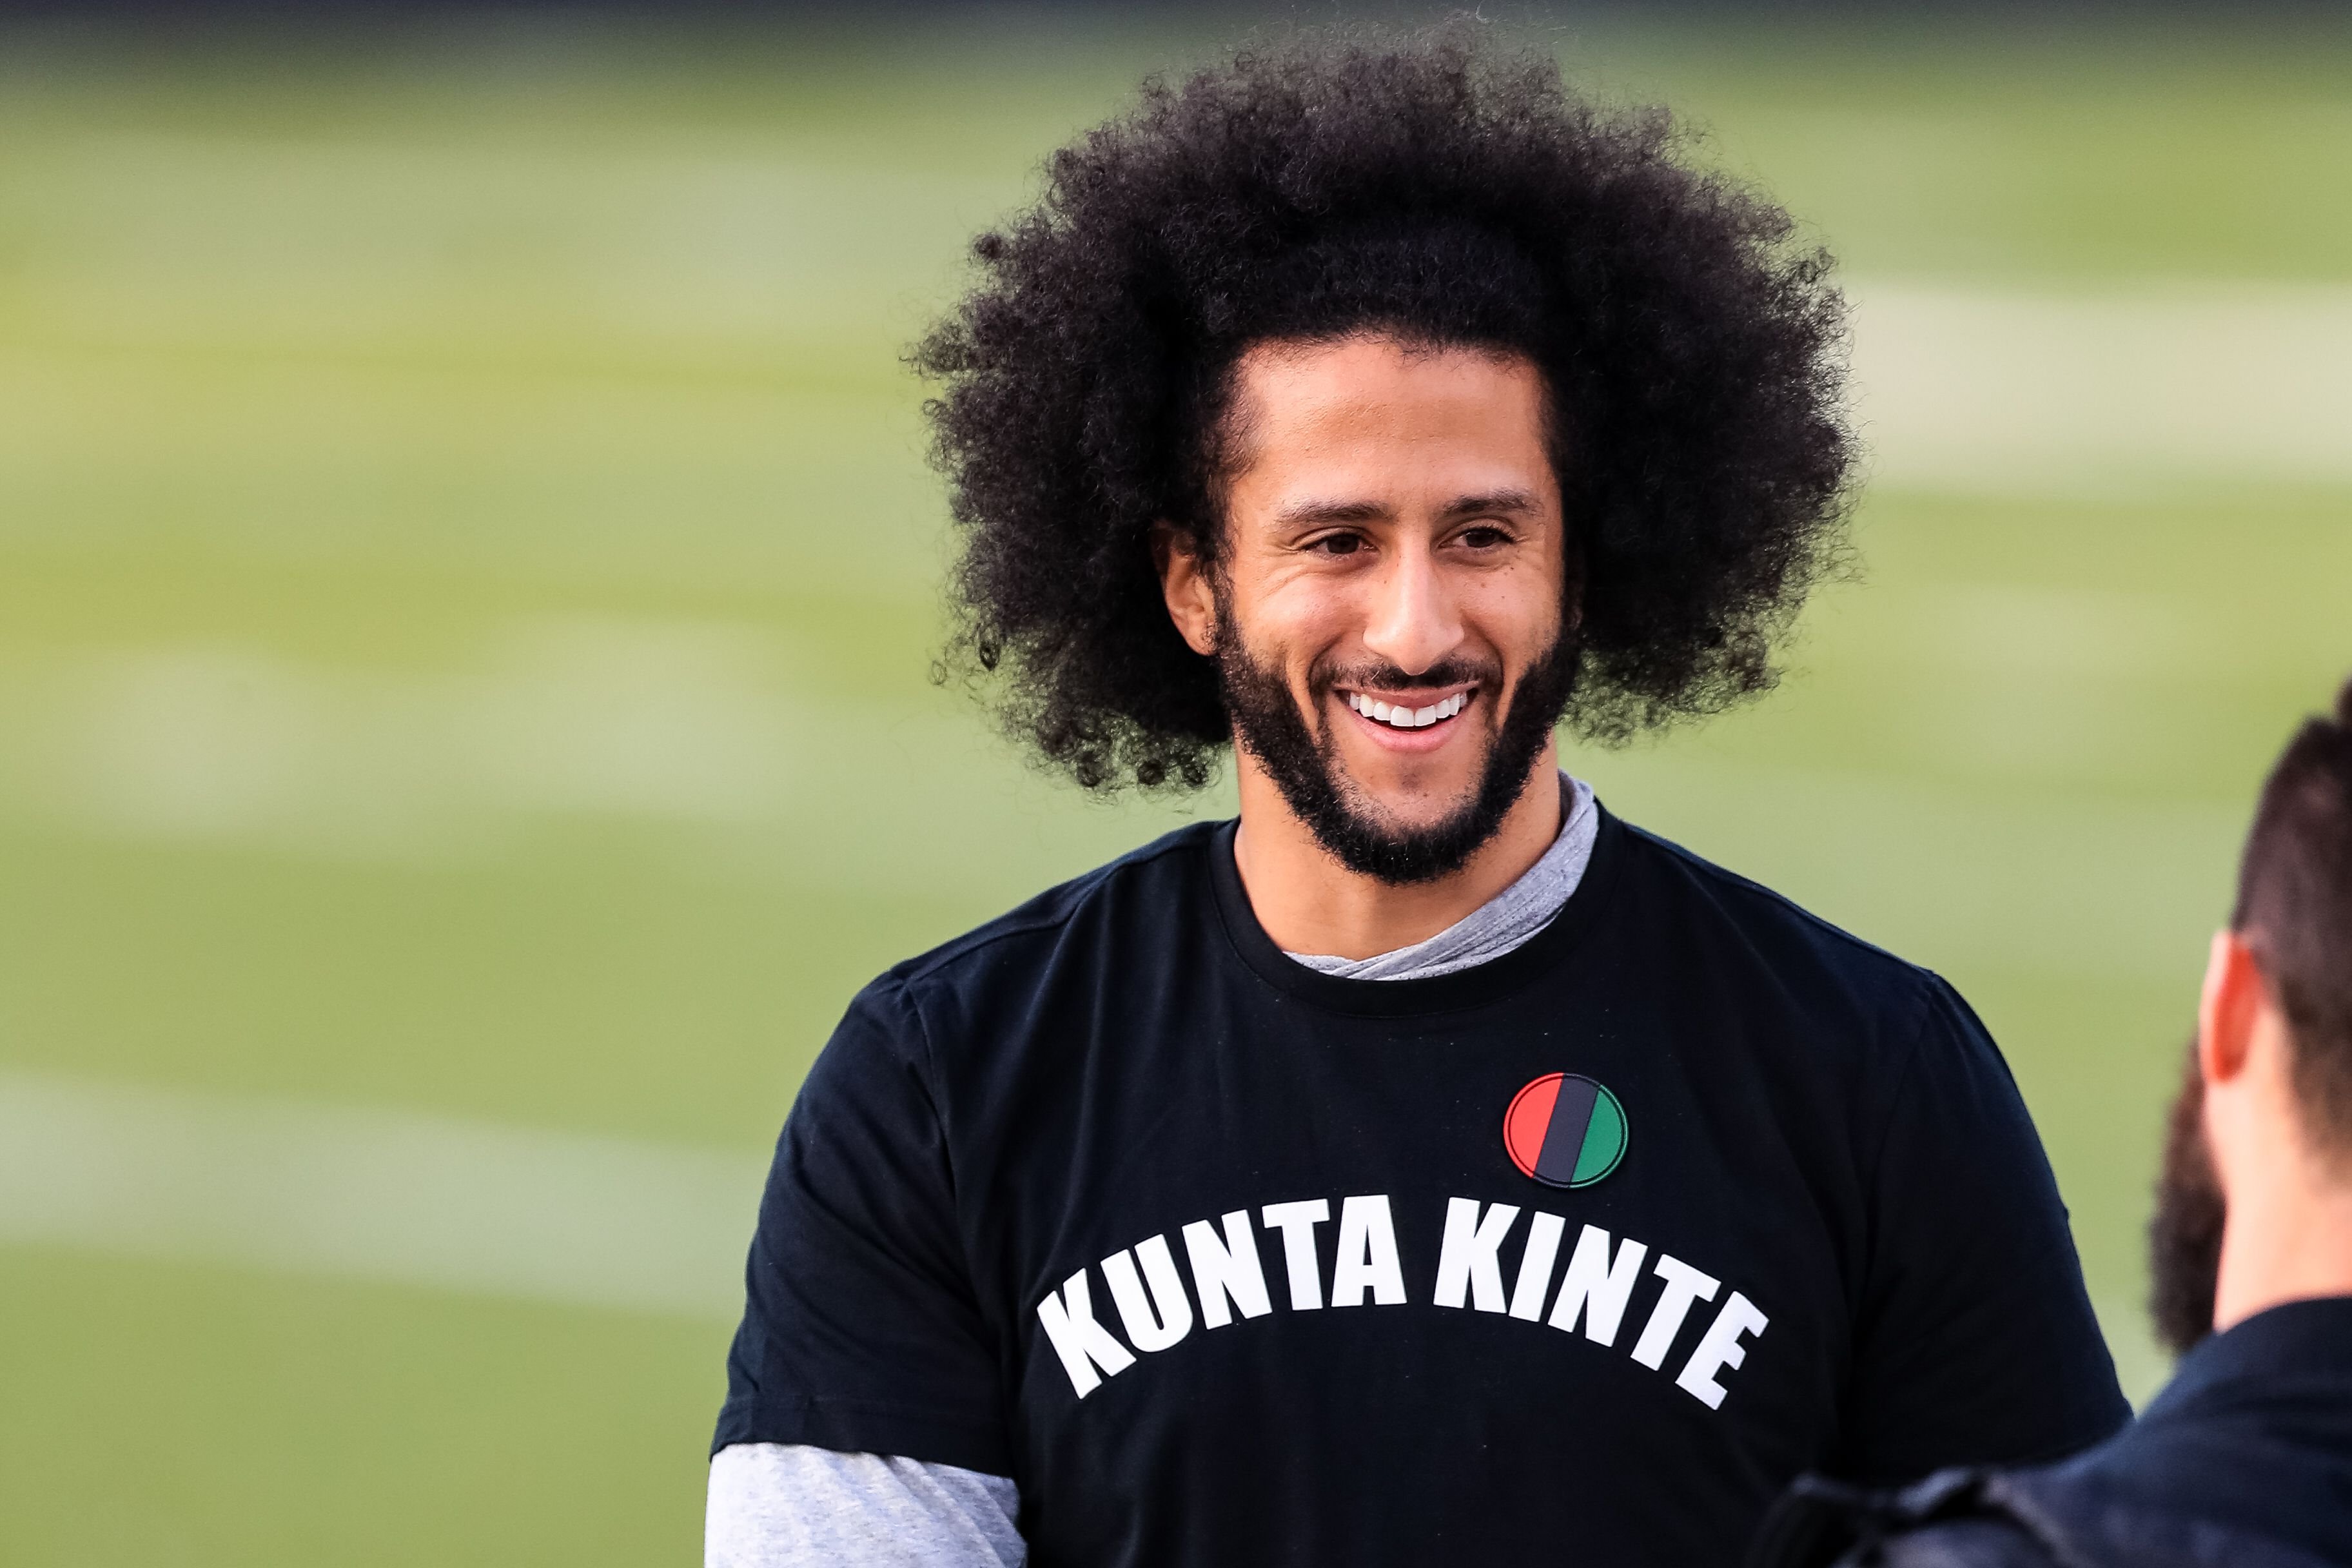 Colin Kaepernick looks on during his NFL workout held at Charles R Drew high school on November 16, 2019 in Riverdale, Georgia. | Source: Getty Images